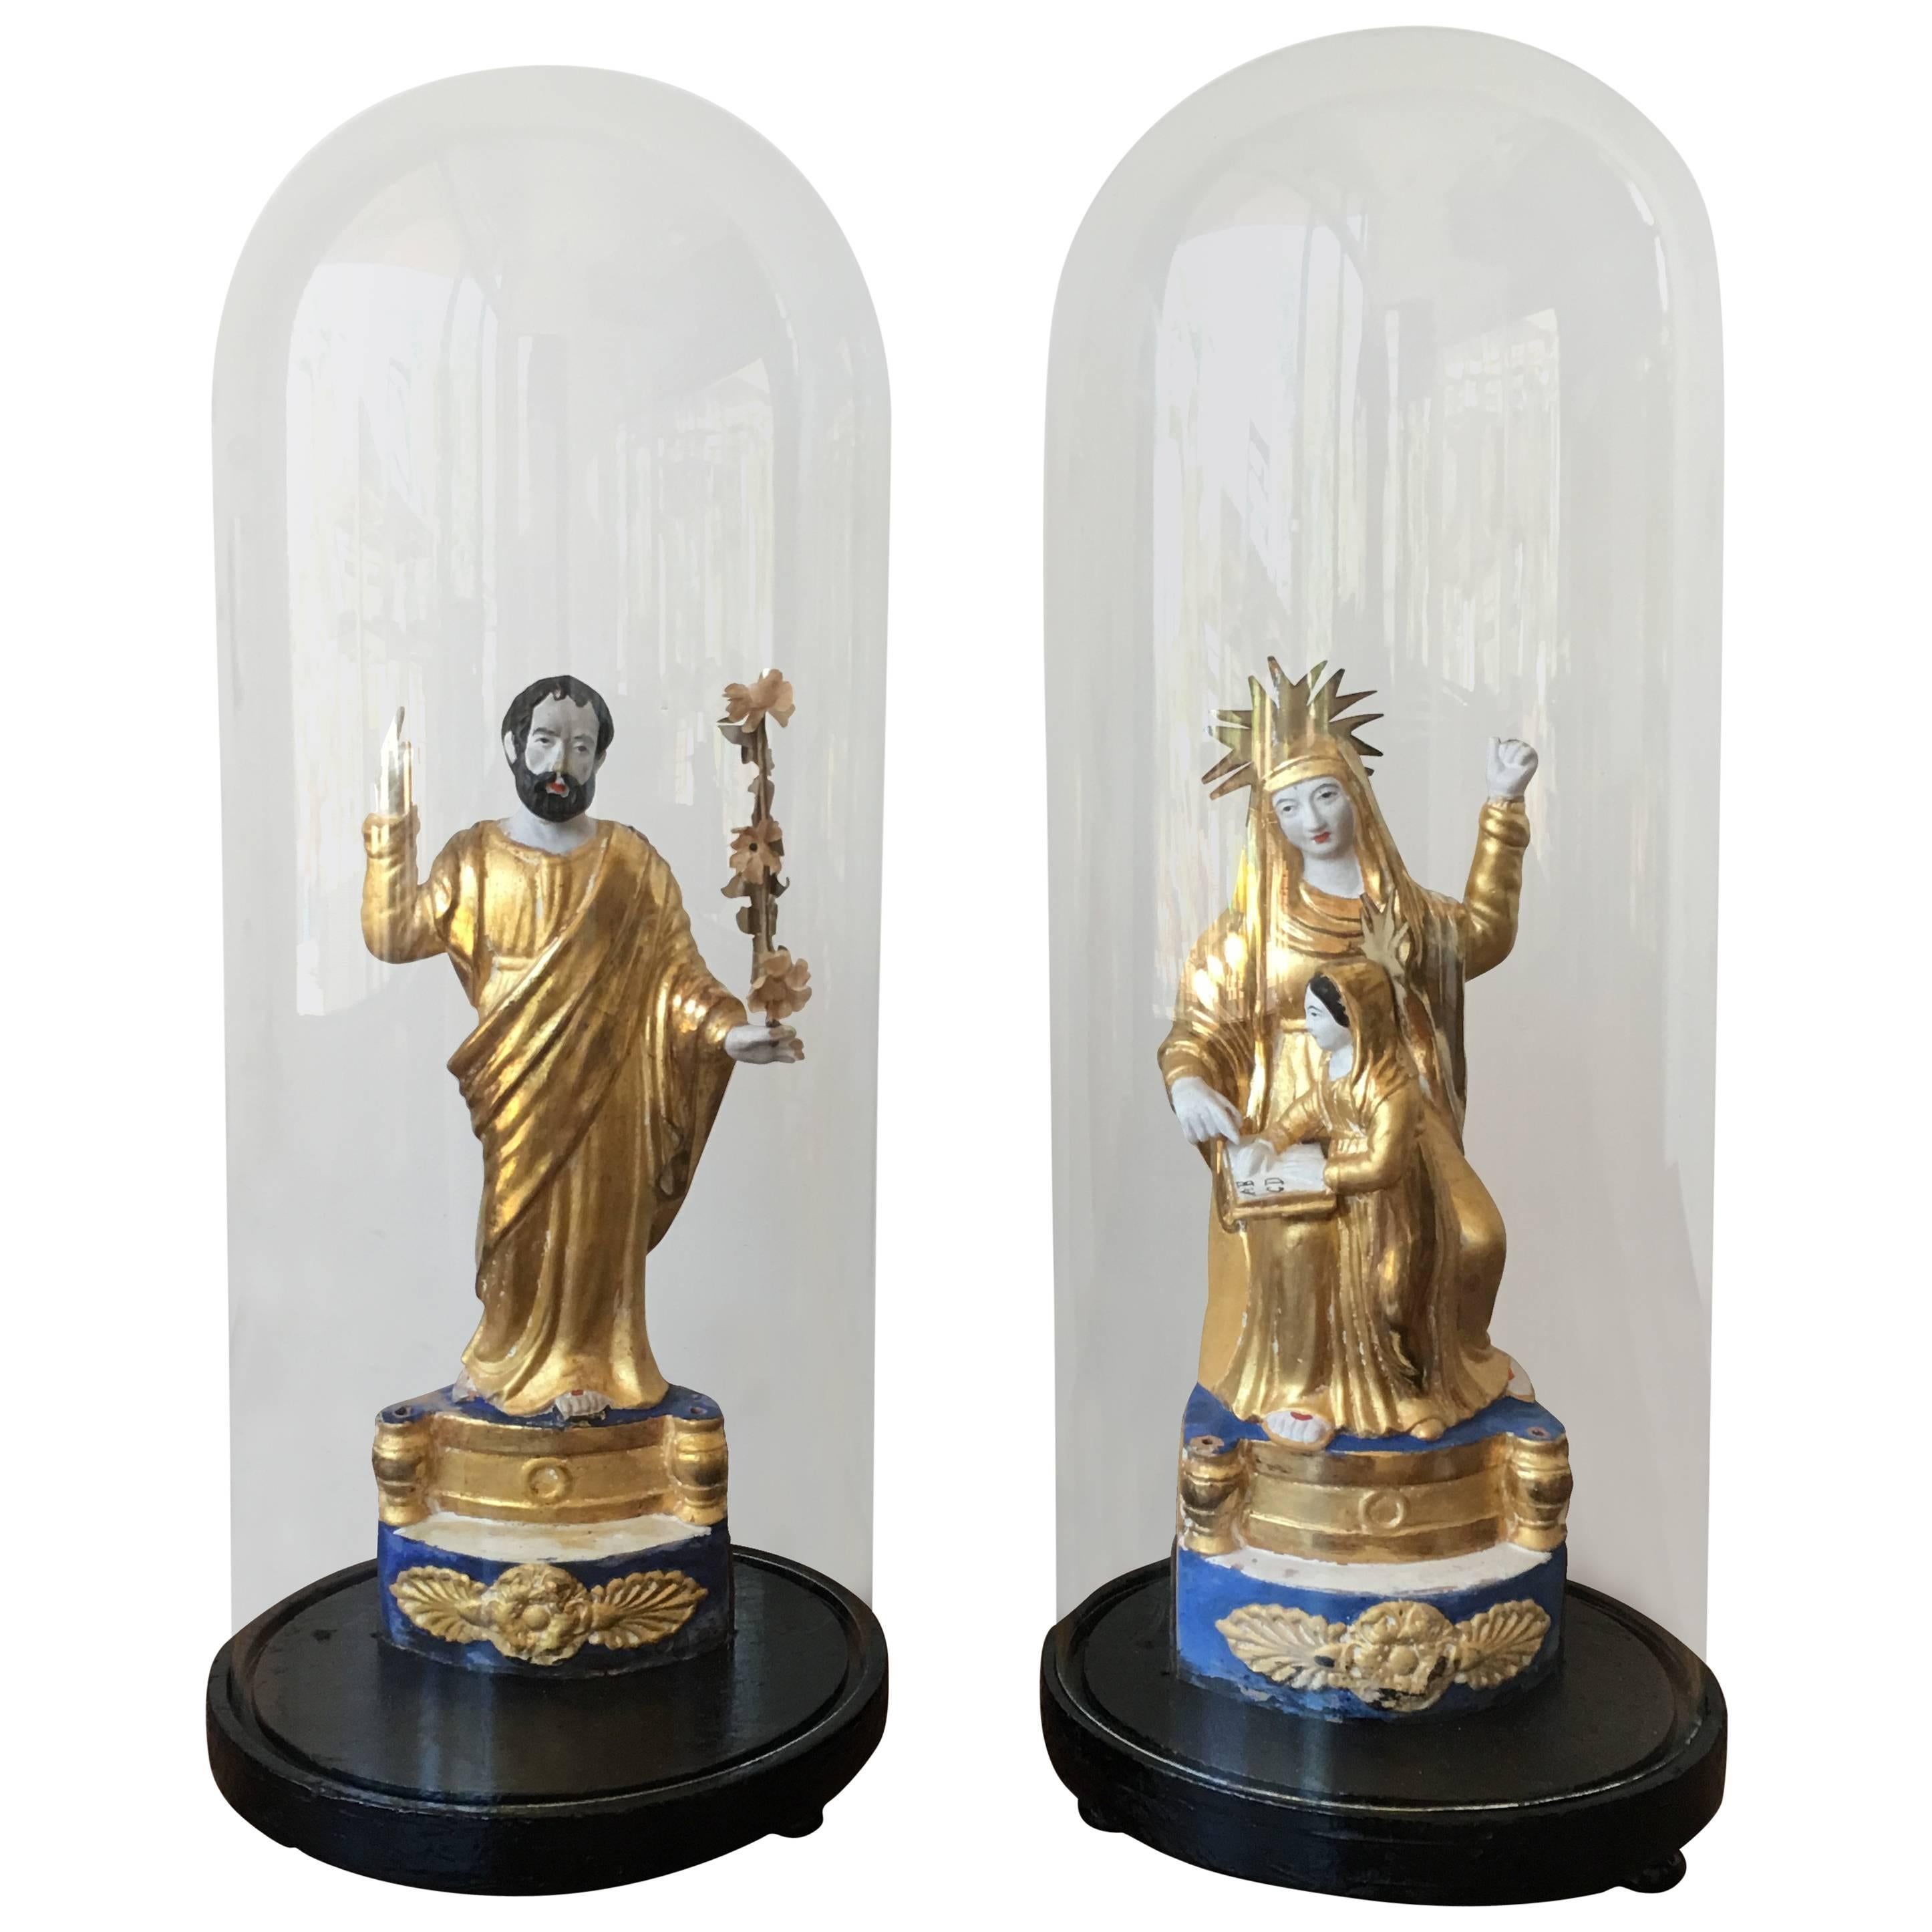 Pair of Italian Gilded Sculptures Religious in a Glass Urn